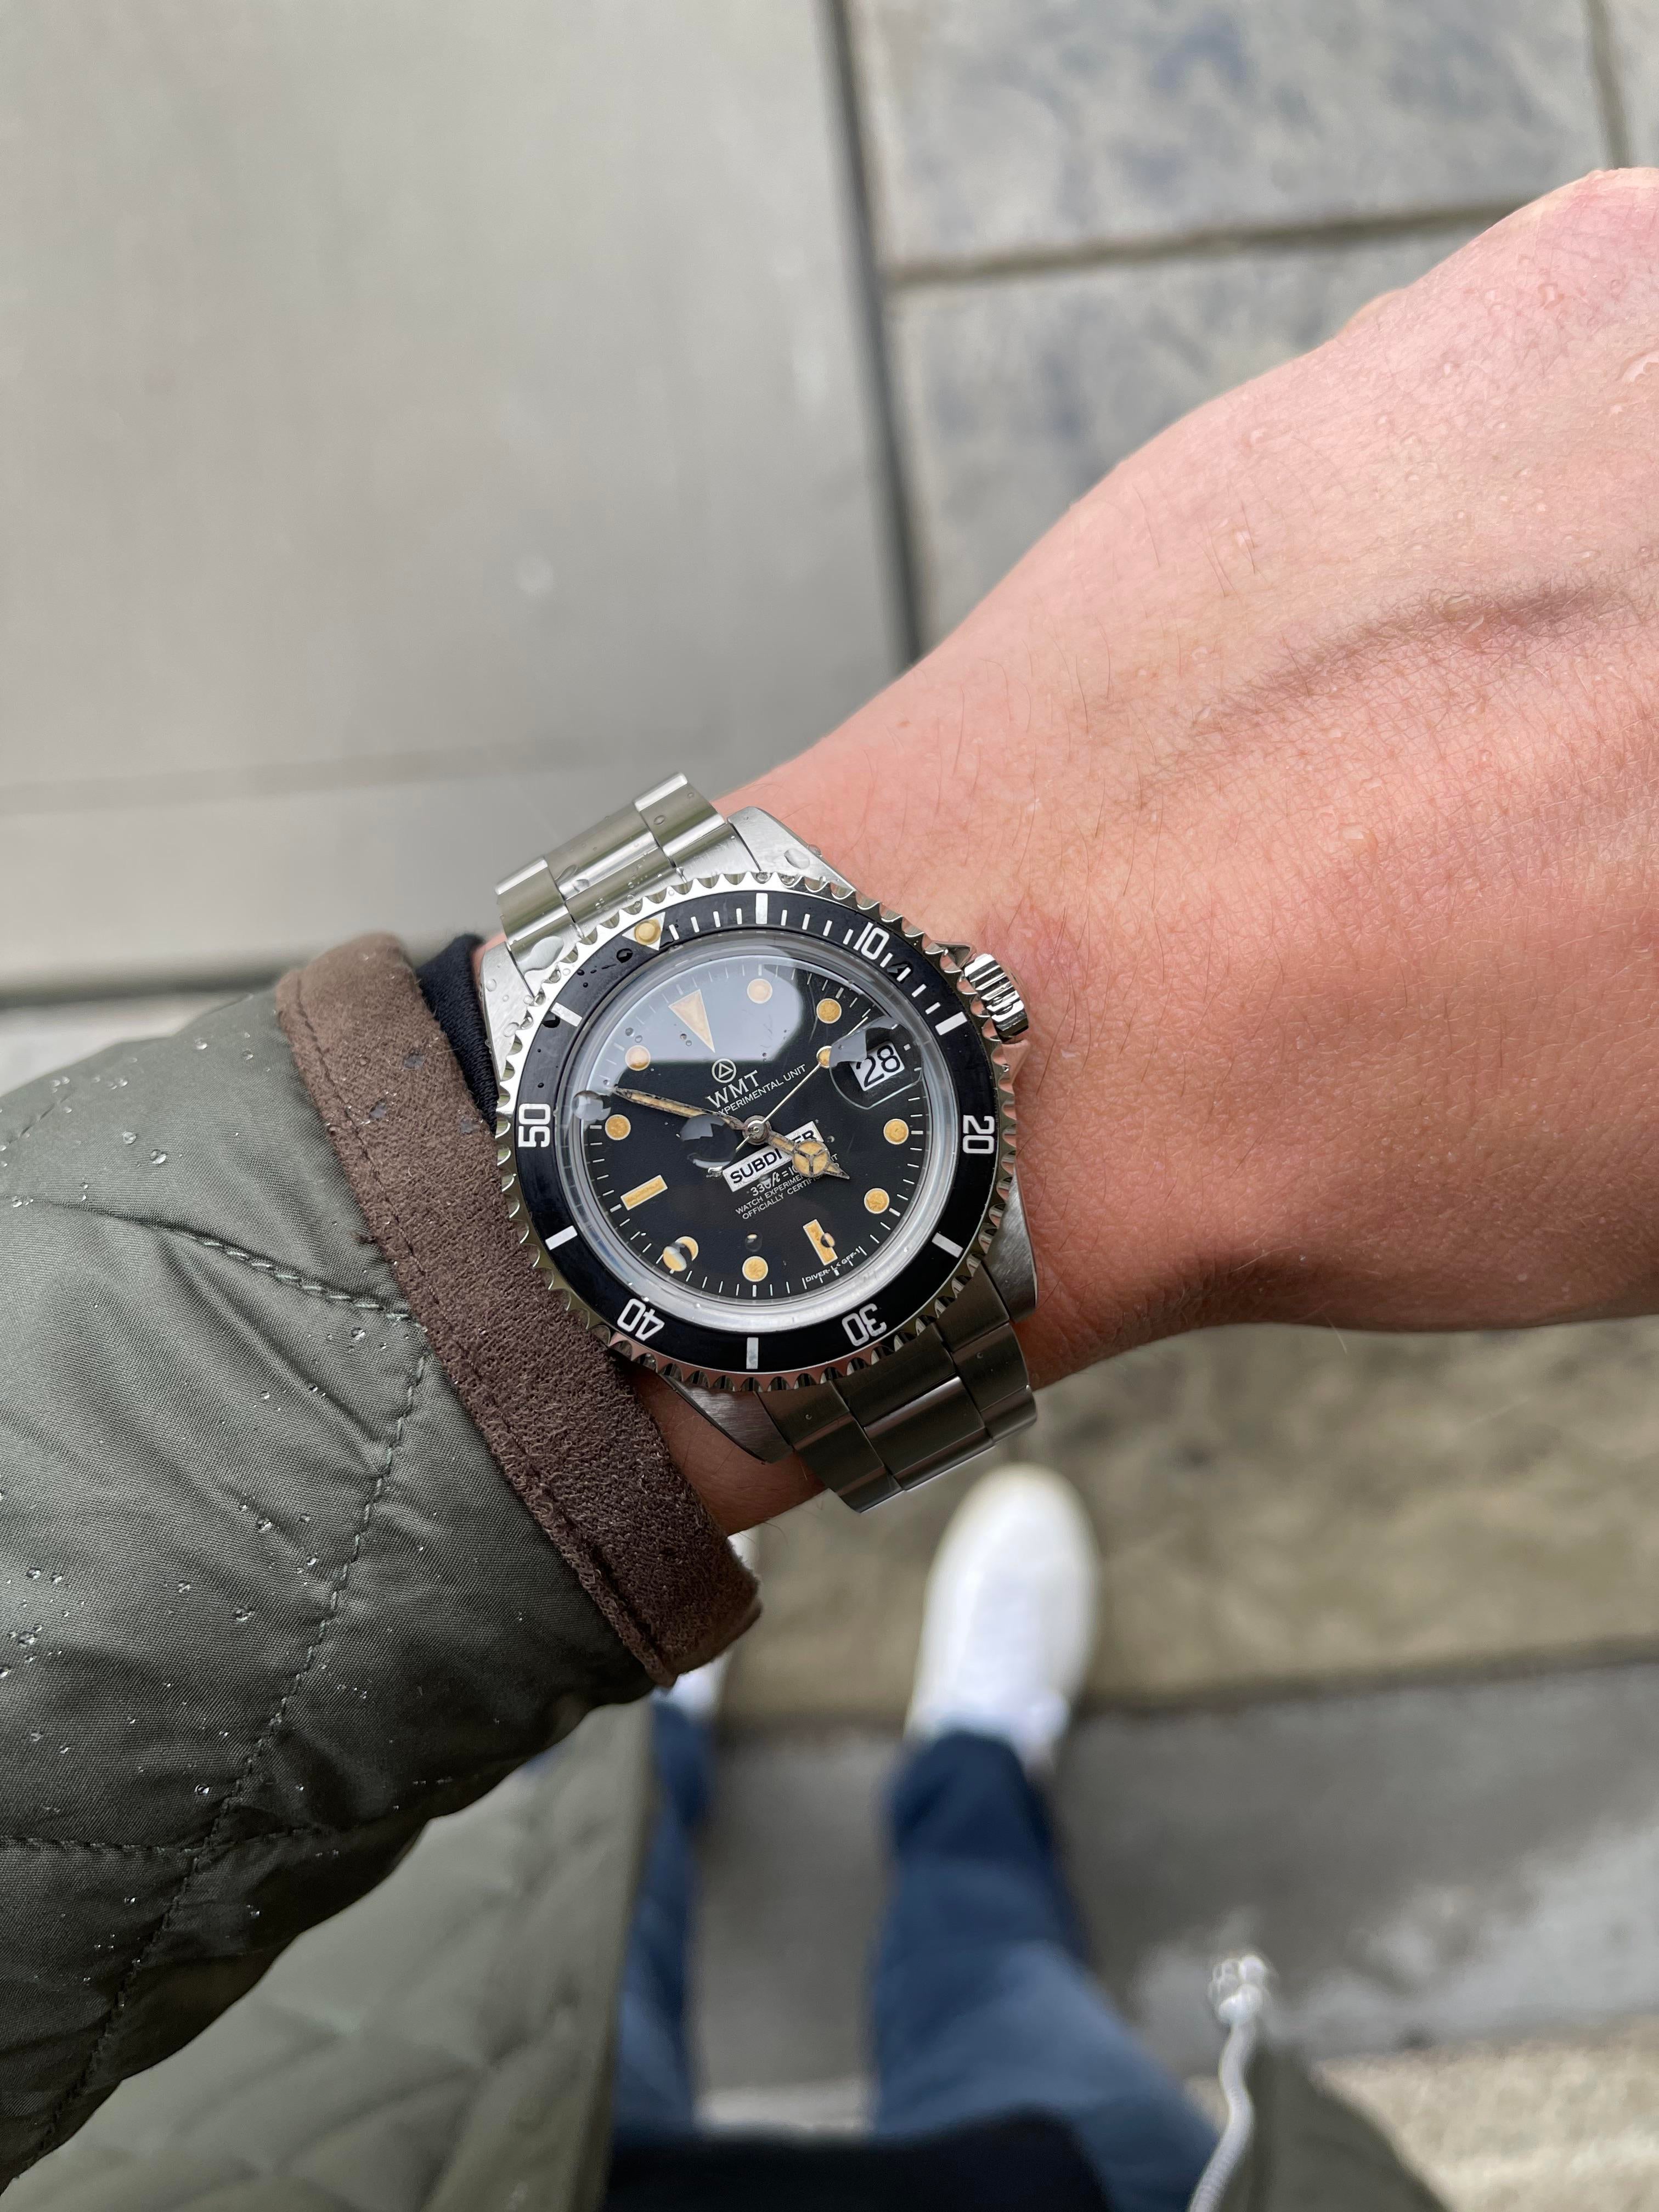 WTS] WMT Royal Marine SubDiver MK2 Limited Edition (Comex 1680